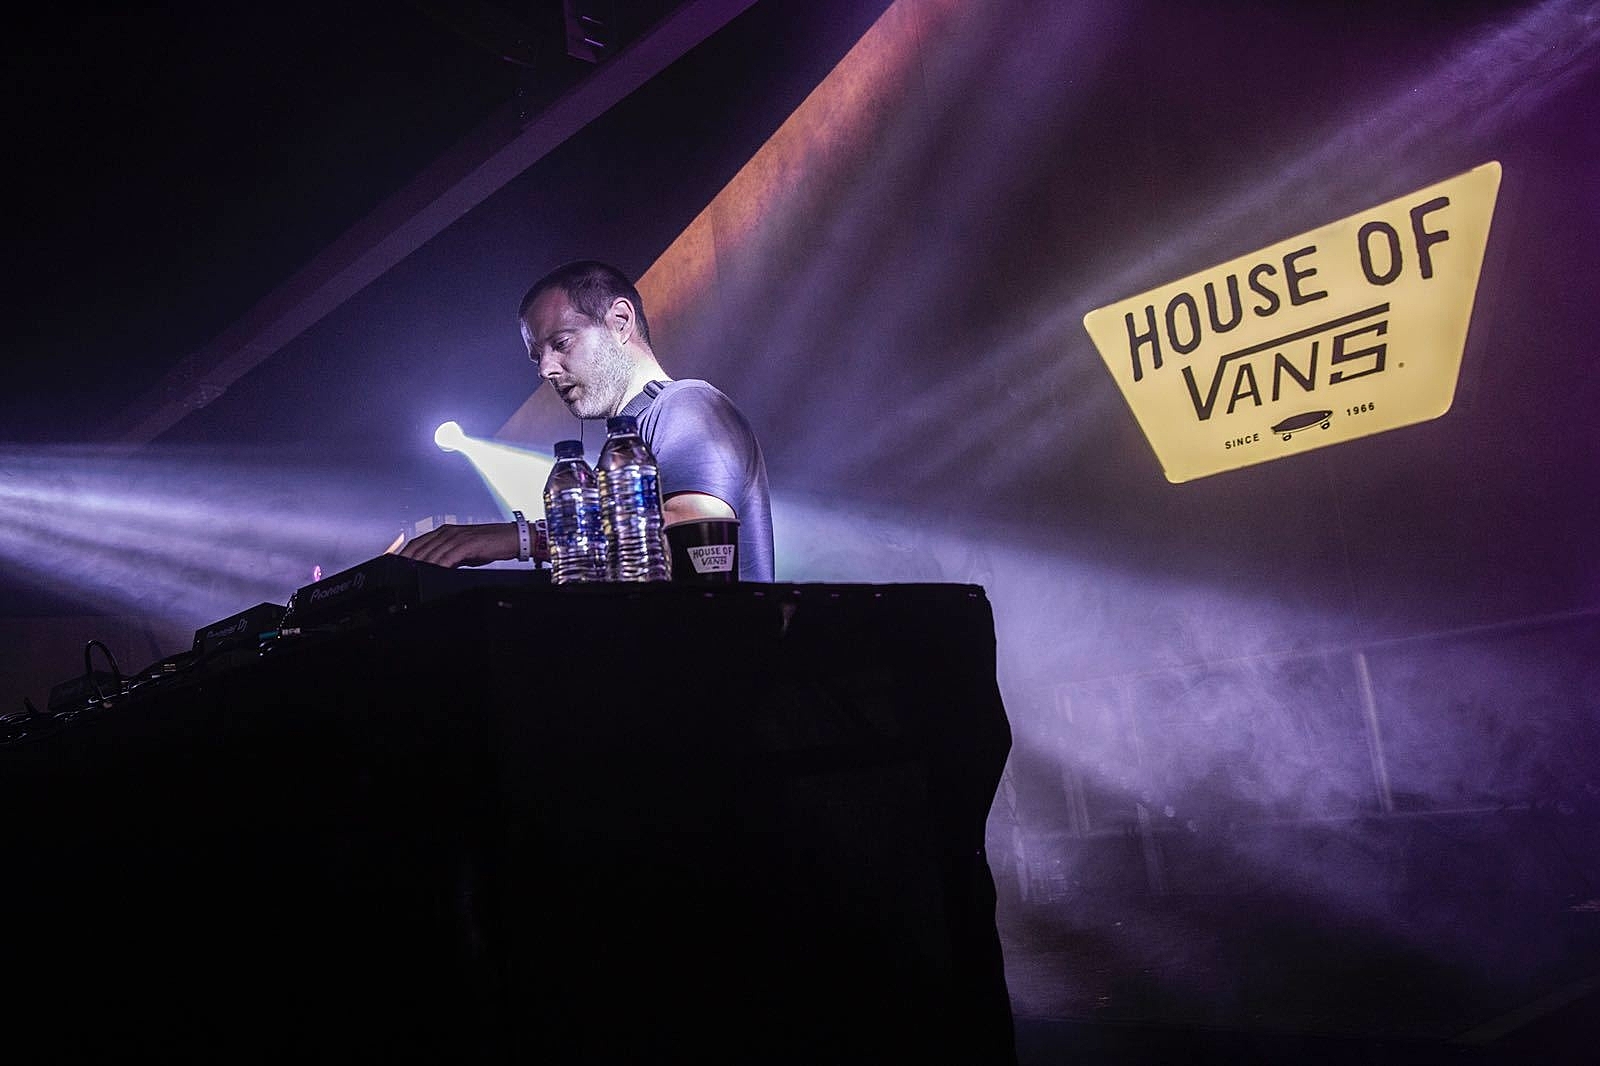 Mike Skinner gives Bestival a final night surprise on the DIY stage at the House Of Vans